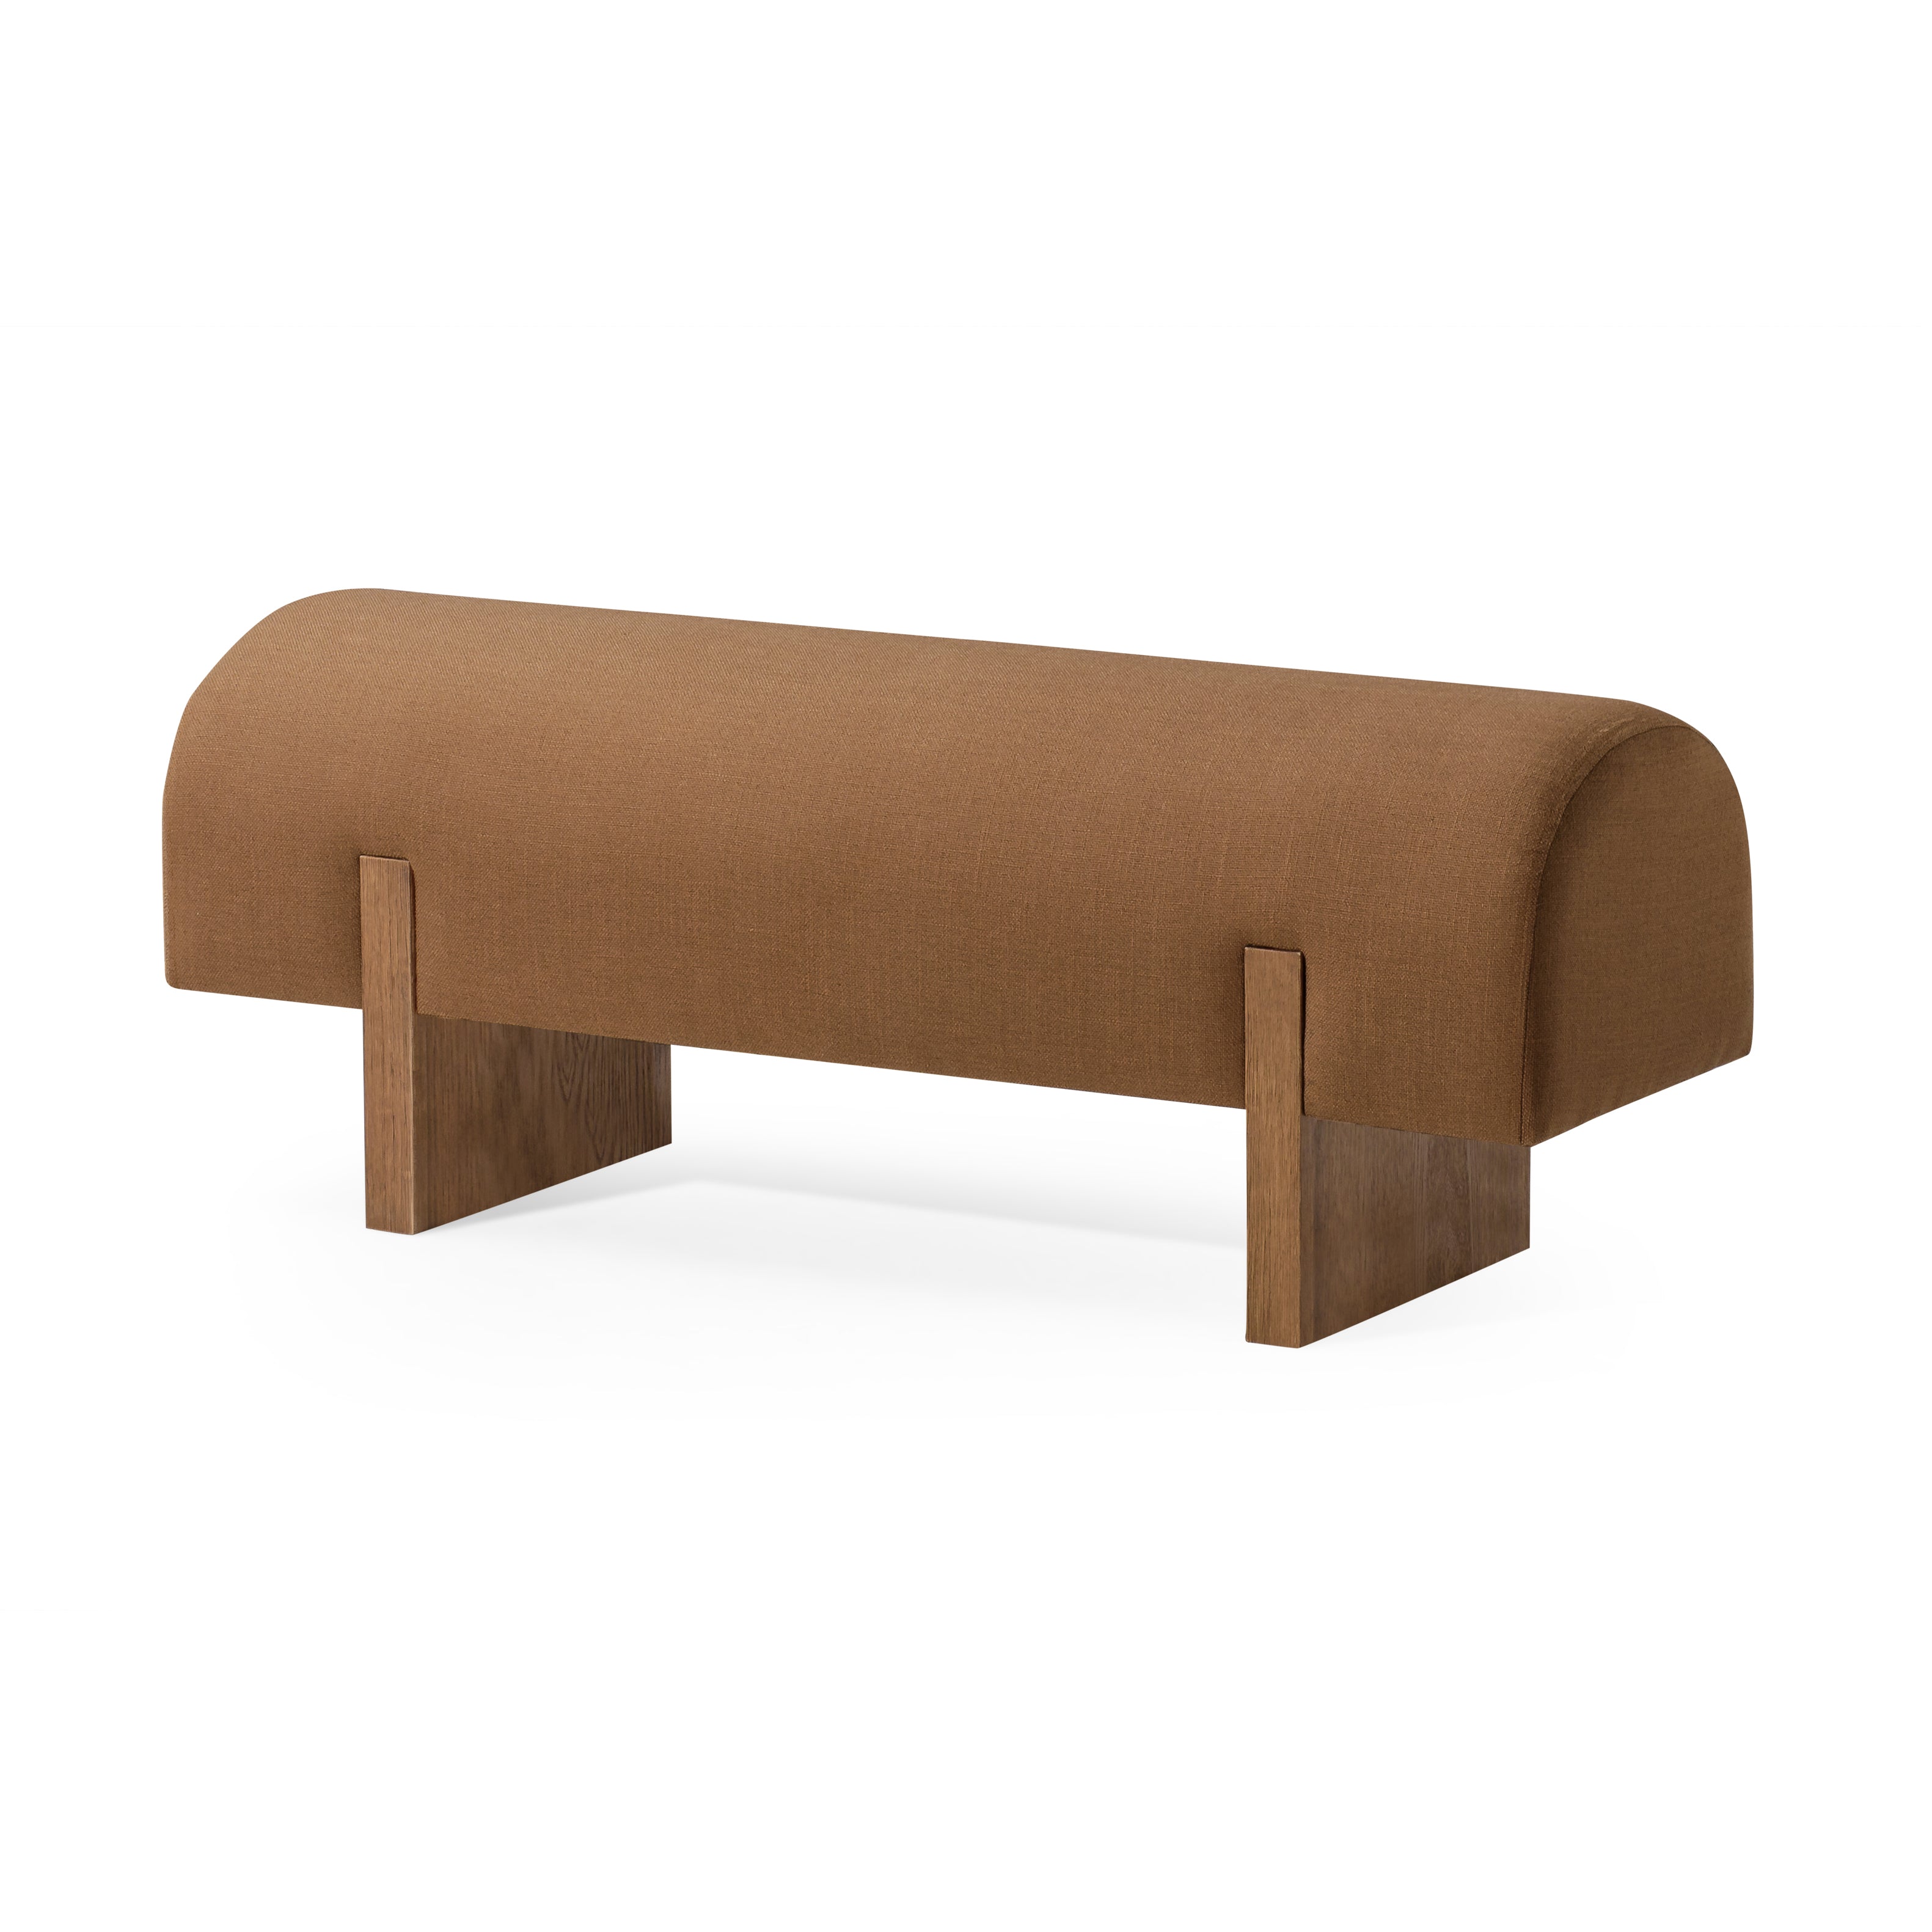 Juno Modern Upholstered Wooden Bench in Refined Brown Finish